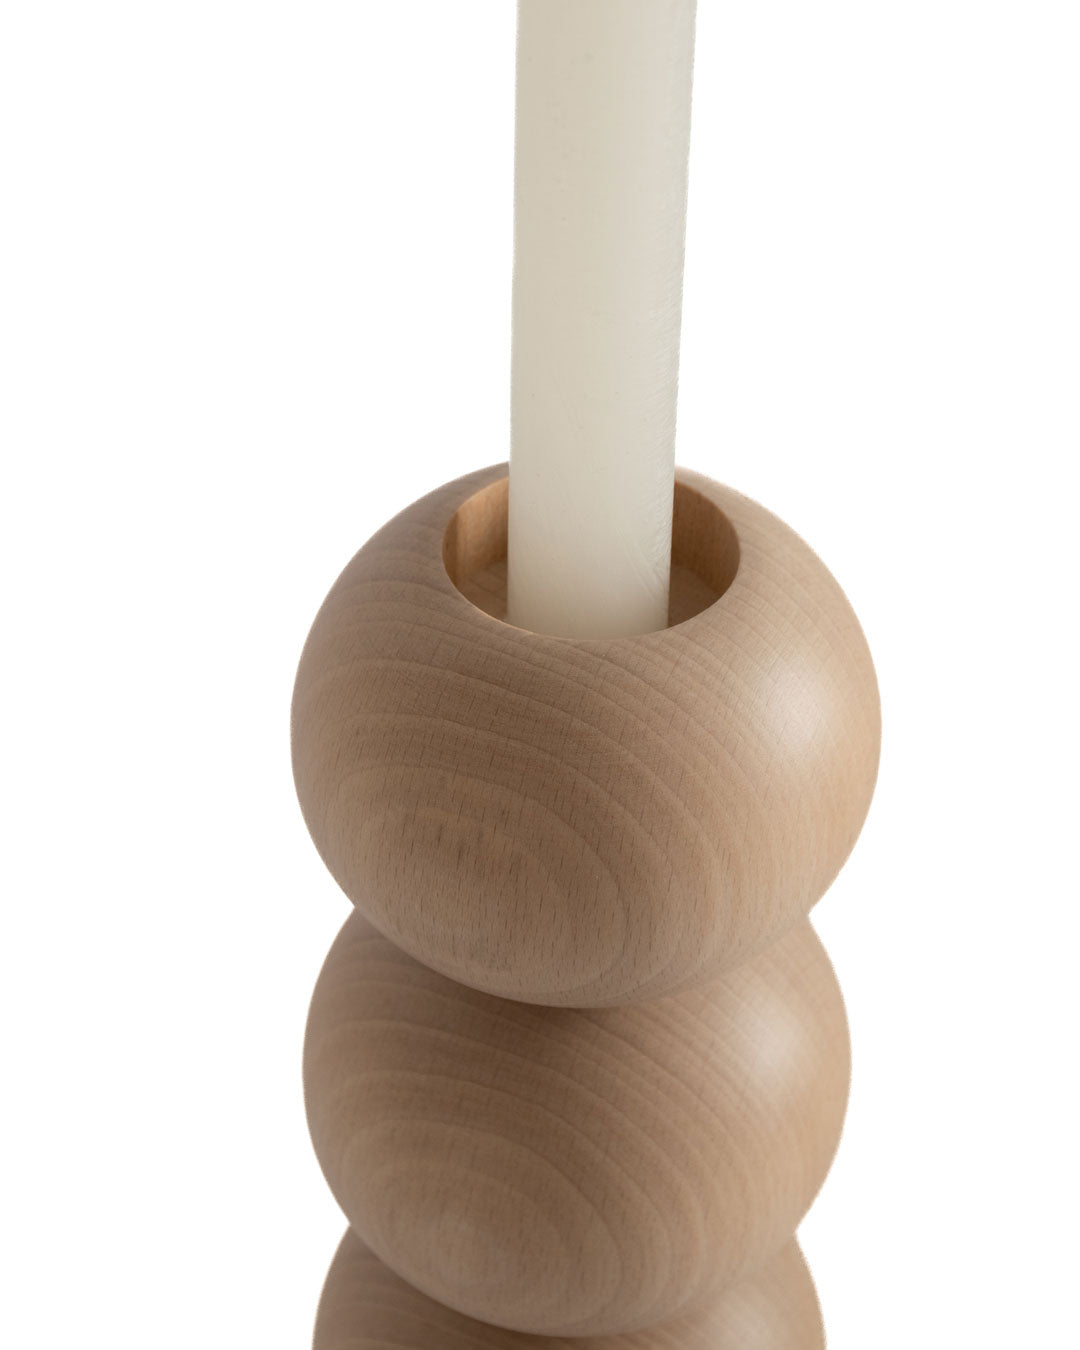 Candleholder-2-in-1-stack candle support